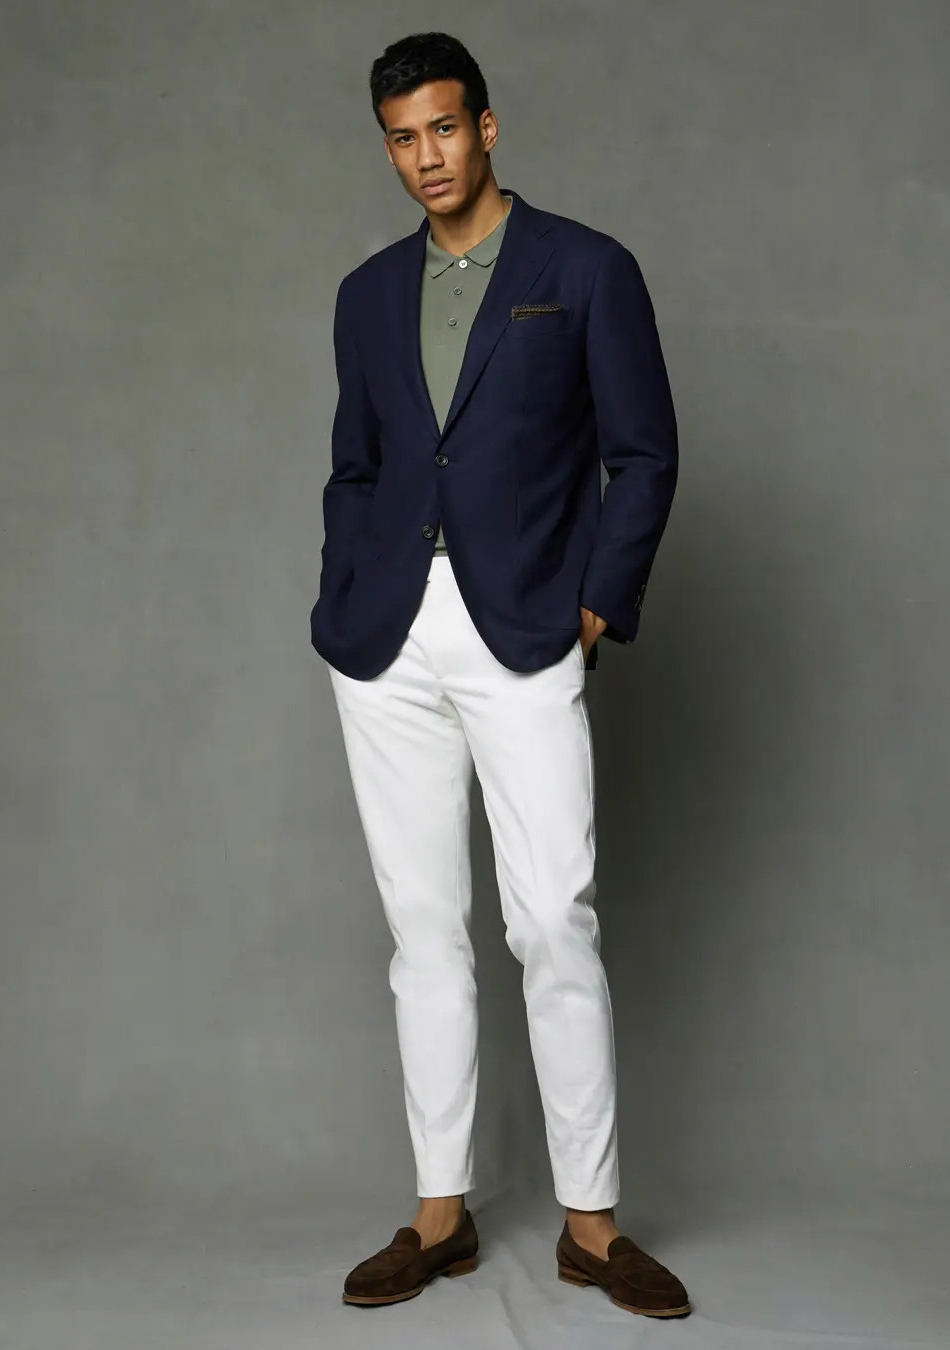 Navy blazer, olive green polo shirt, white pants, and brown suede loafers